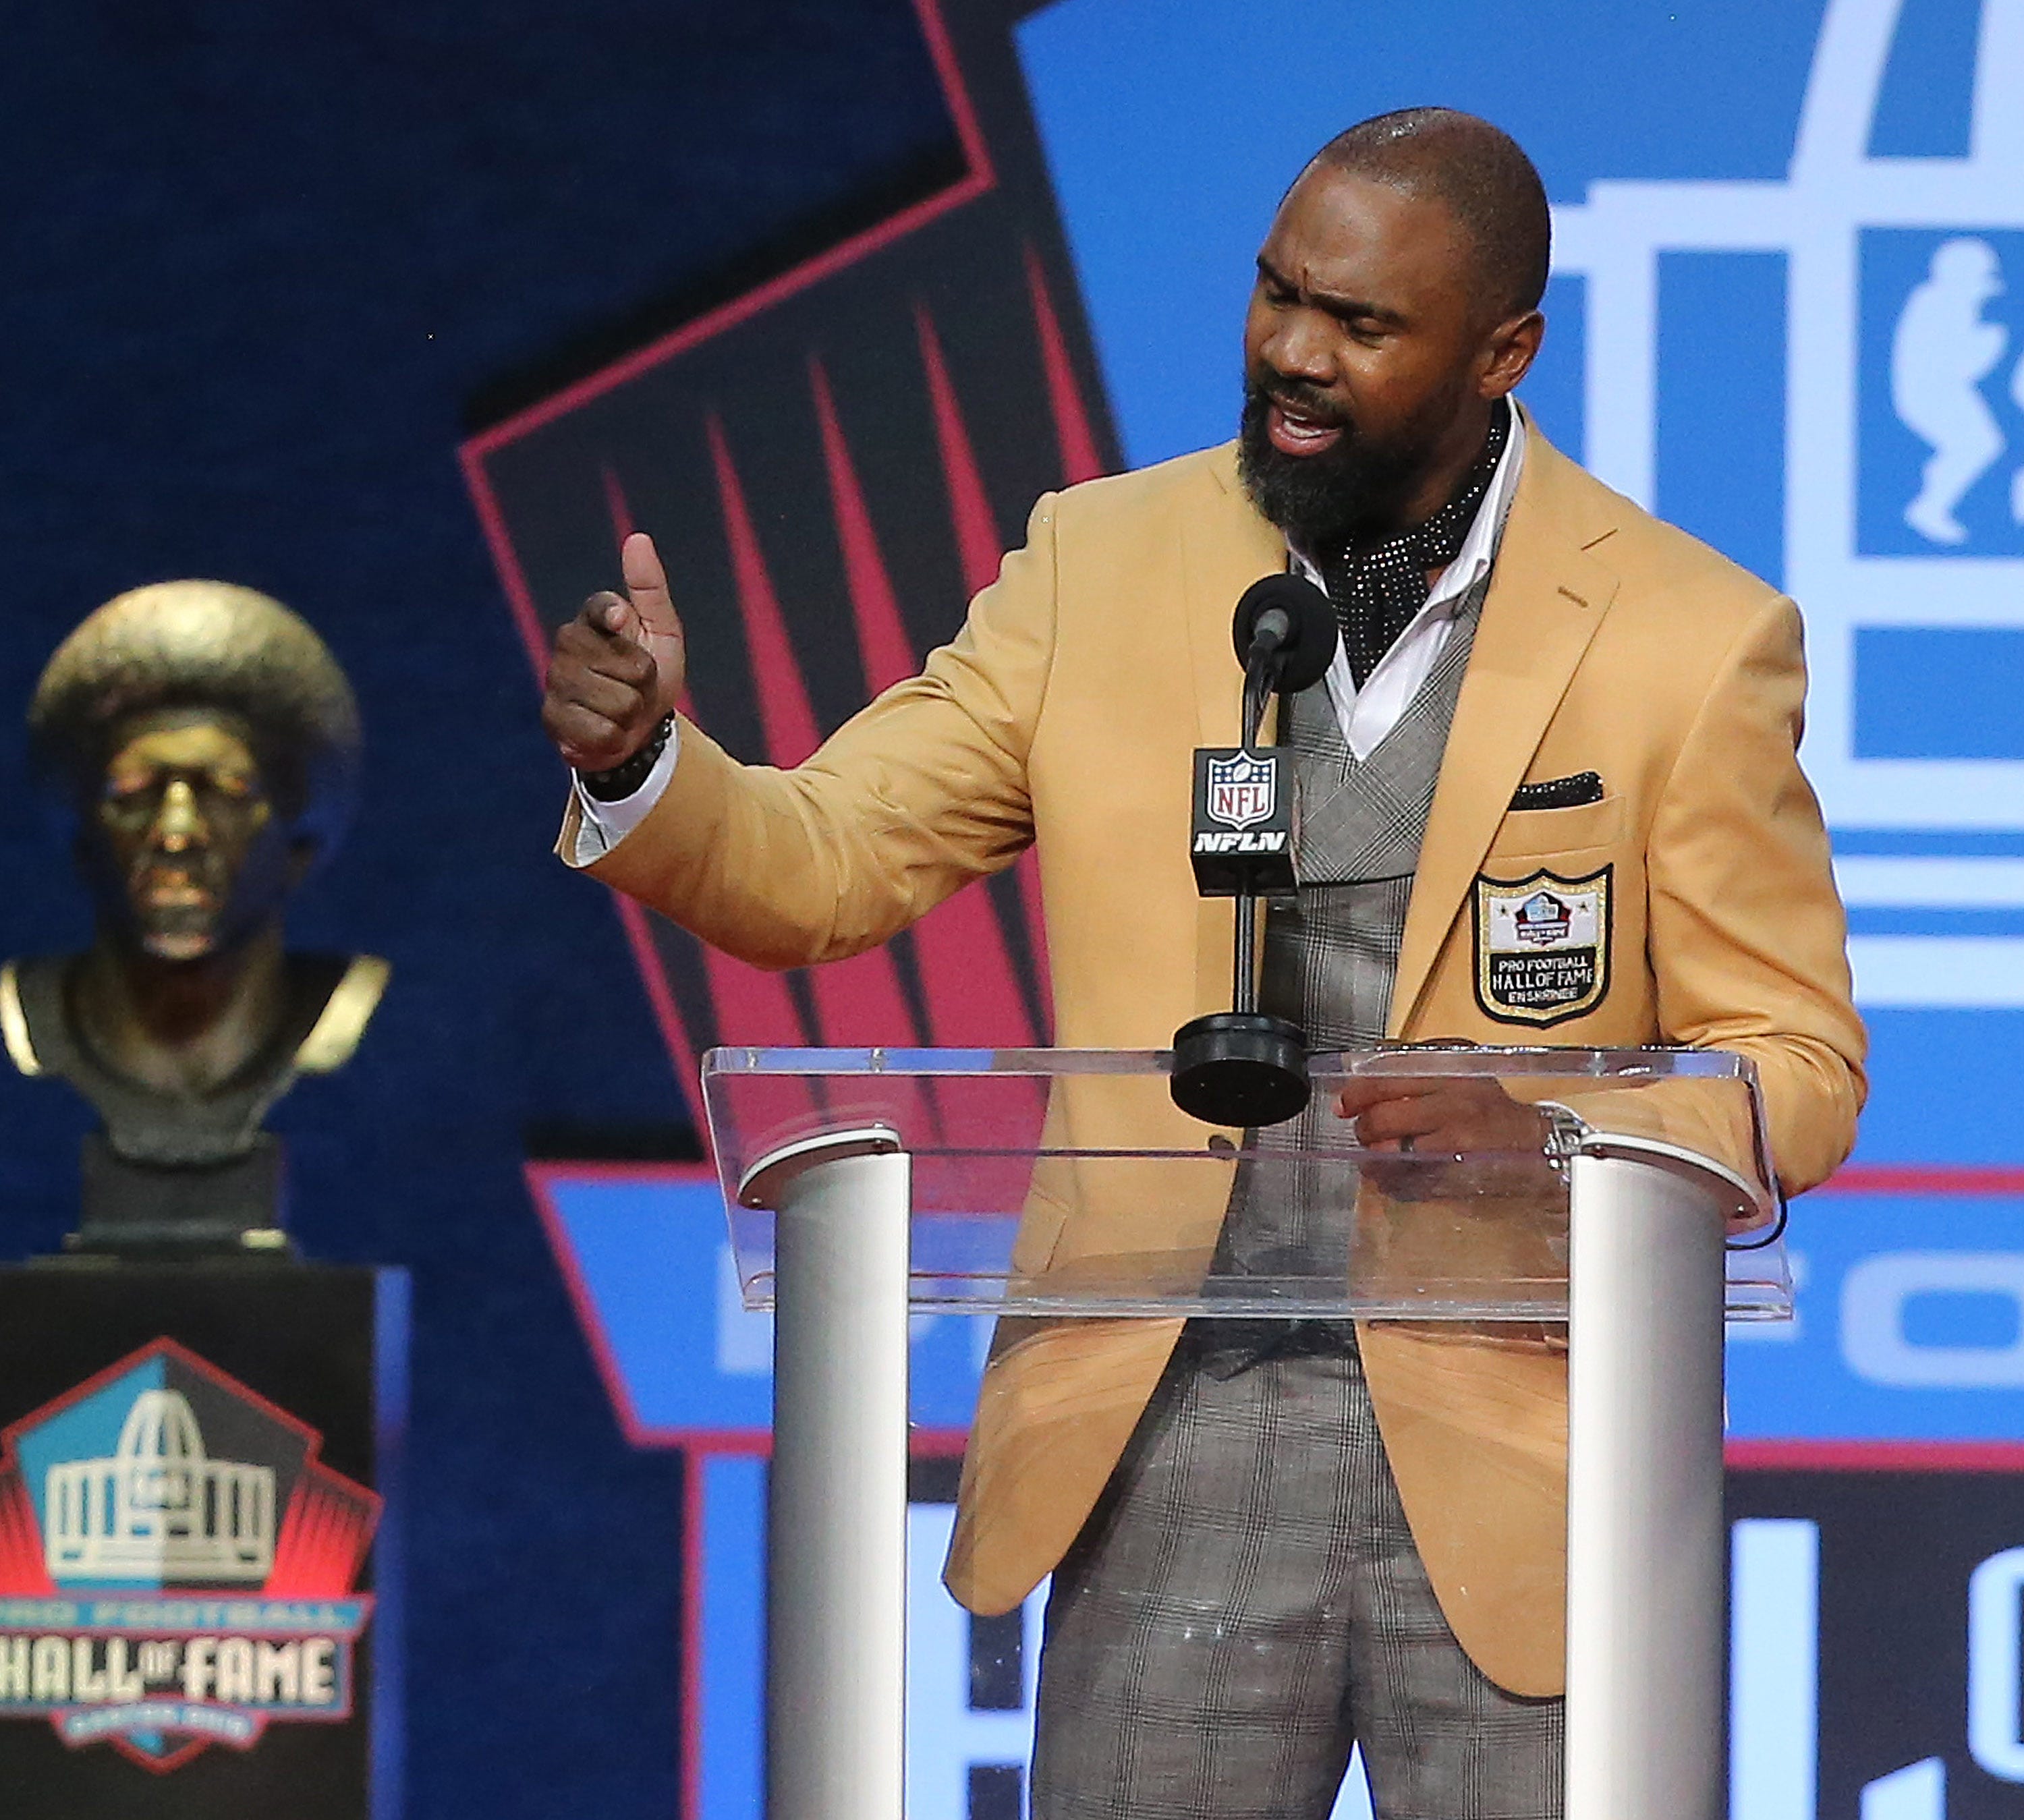 charles woodson hall of fame as a packer or raider